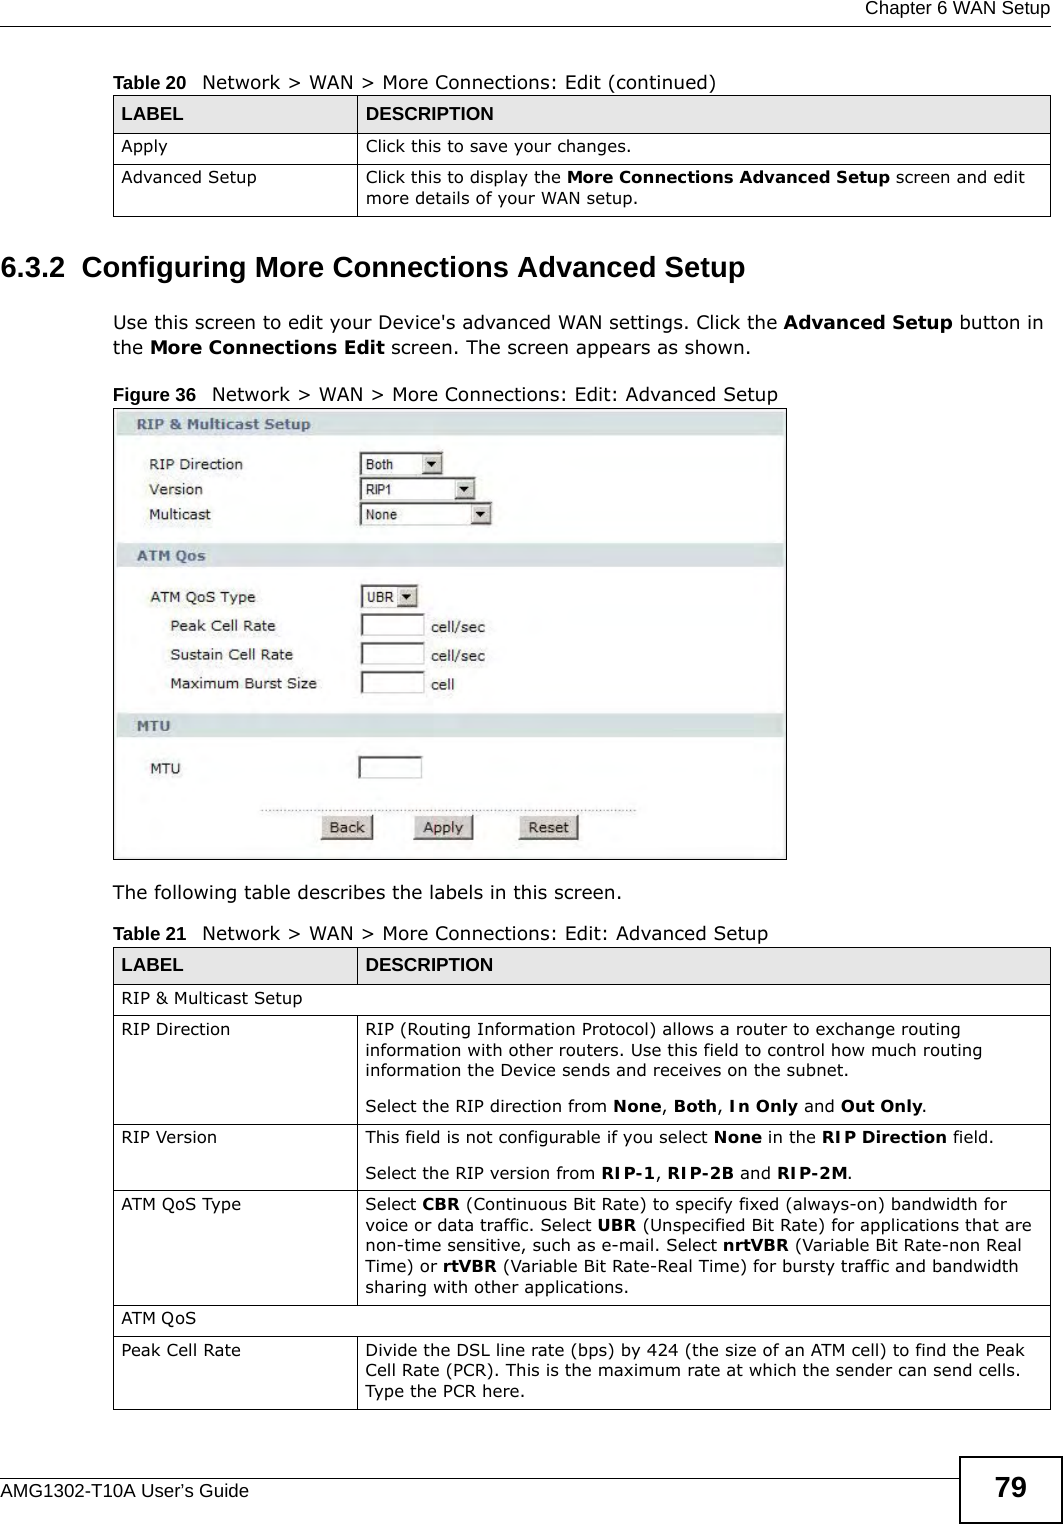  Chapter 6 WAN SetupAMG1302-T10A User’s Guide 796.3.2  Configuring More Connections Advanced Setup Use this screen to edit your Device&apos;s advanced WAN settings. Click the Advanced Setup button in the More Connections Edit screen. The screen appears as shown.Figure 36   Network &gt; WAN &gt; More Connections: Edit: Advanced SetupThe following table describes the labels in this screen. Apply Click this to save your changes. Advanced Setup Click this to display the More Connections Advanced Setup screen and edit more details of your WAN setup.Table 20   Network &gt; WAN &gt; More Connections: Edit (continued)LABEL DESCRIPTIONTable 21   Network &gt; WAN &gt; More Connections: Edit: Advanced SetupLABEL DESCRIPTIONRIP &amp; Multicast SetupRIP Direction RIP (Routing Information Protocol) allows a router to exchange routing information with other routers. Use this field to control how much routing information the Device sends and receives on the subnet.Select the RIP direction from None, Both, In Only and Out Only.RIP Version This field is not configurable if you select None in the RIP Direction field.Select the RIP version from RIP-1, RIP-2B and RIP-2M.ATM QoS Type Select CBR (Continuous Bit Rate) to specify fixed (always-on) bandwidth for voice or data traffic. Select UBR (Unspecified Bit Rate) for applications that are non-time sensitive, such as e-mail. Select nrtVBR (Variable Bit Rate-non Real Time) or rtVBR (Variable Bit Rate-Real Time) for bursty traffic and bandwidth sharing with other applications. ATM Q oSPeak Cell Rate Divide the DSL line rate (bps) by 424 (the size of an ATM cell) to find the Peak Cell Rate (PCR). This is the maximum rate at which the sender can send cells. Type the PCR here.